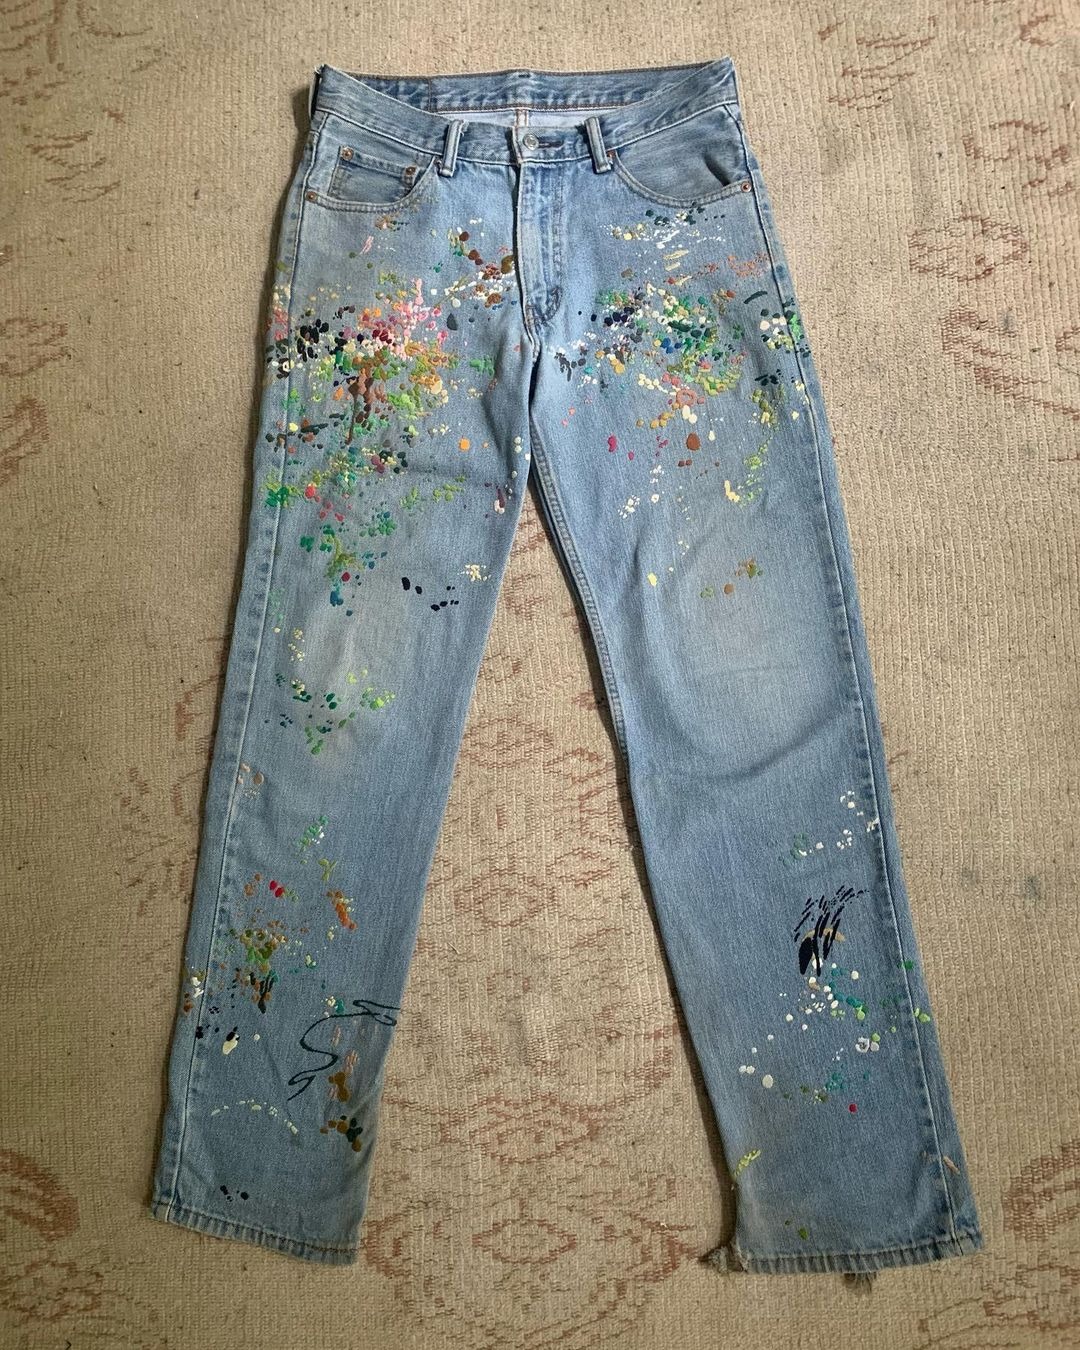 Embroidered paint splatter on vintage clothes.